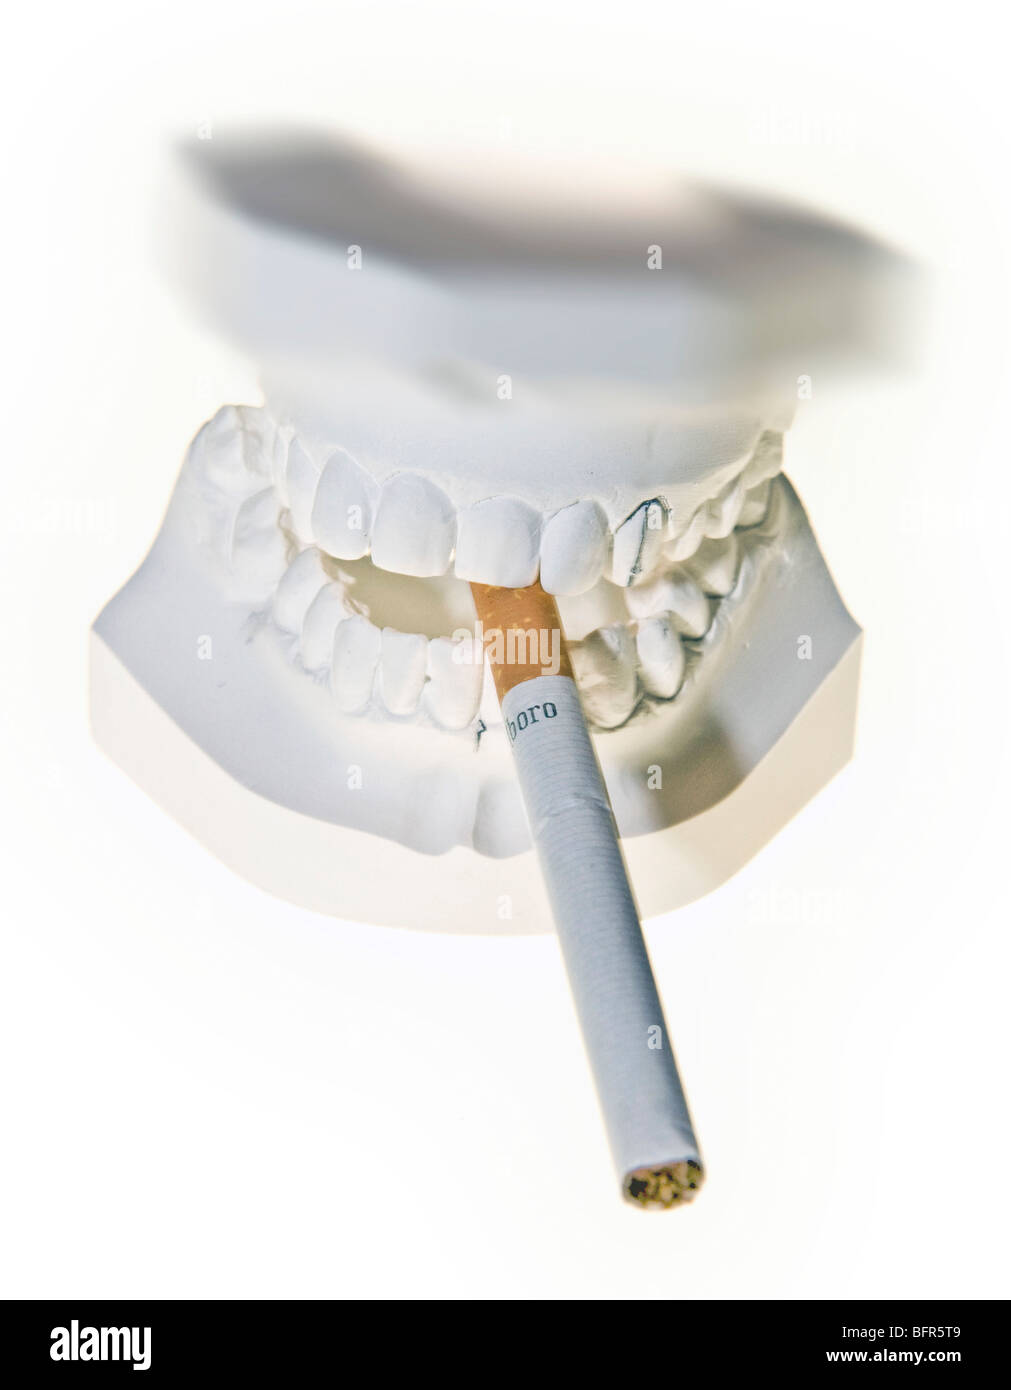 Plaster mould of teeth with cigarette Stock Photo